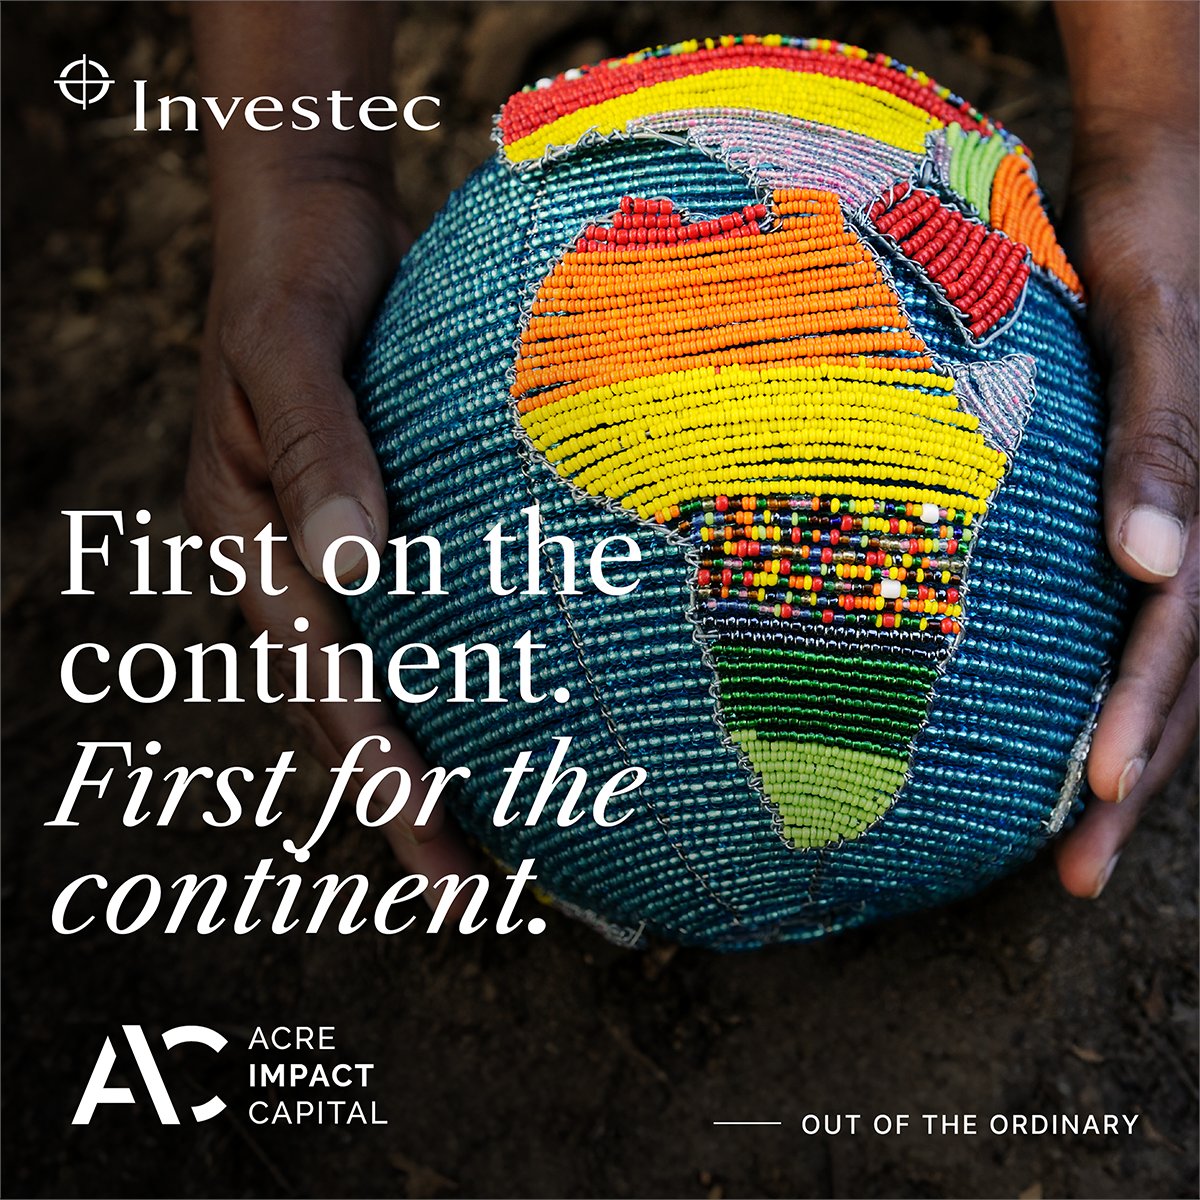 Investec is proud to be the anchor investor in @AcreCap, Africa's first export finance impact fund, partnering with banks and export credit agencies to finance up to US$2bn of green and social infrastructure on the continent. Read more: link.investec.com/m87yo7